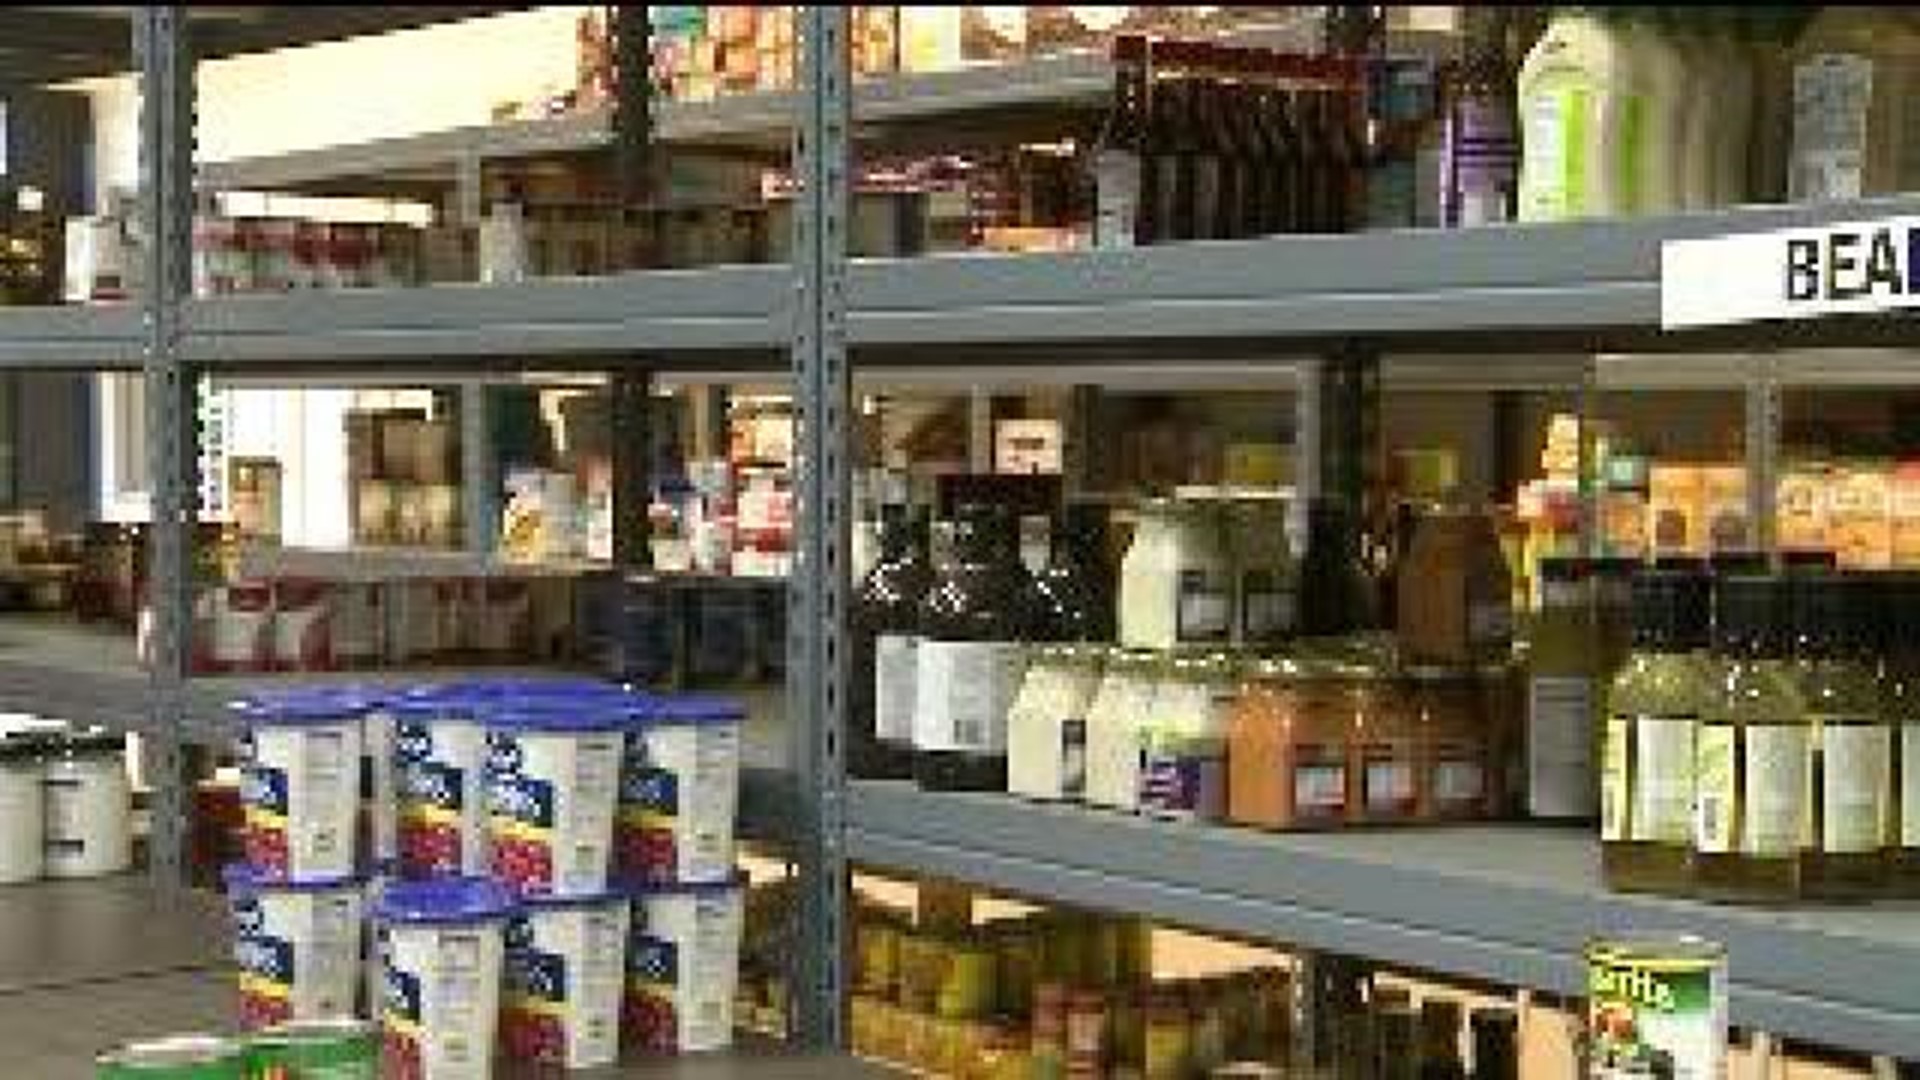 Central PA Food Bank to Provide Free Milk for Families in Need